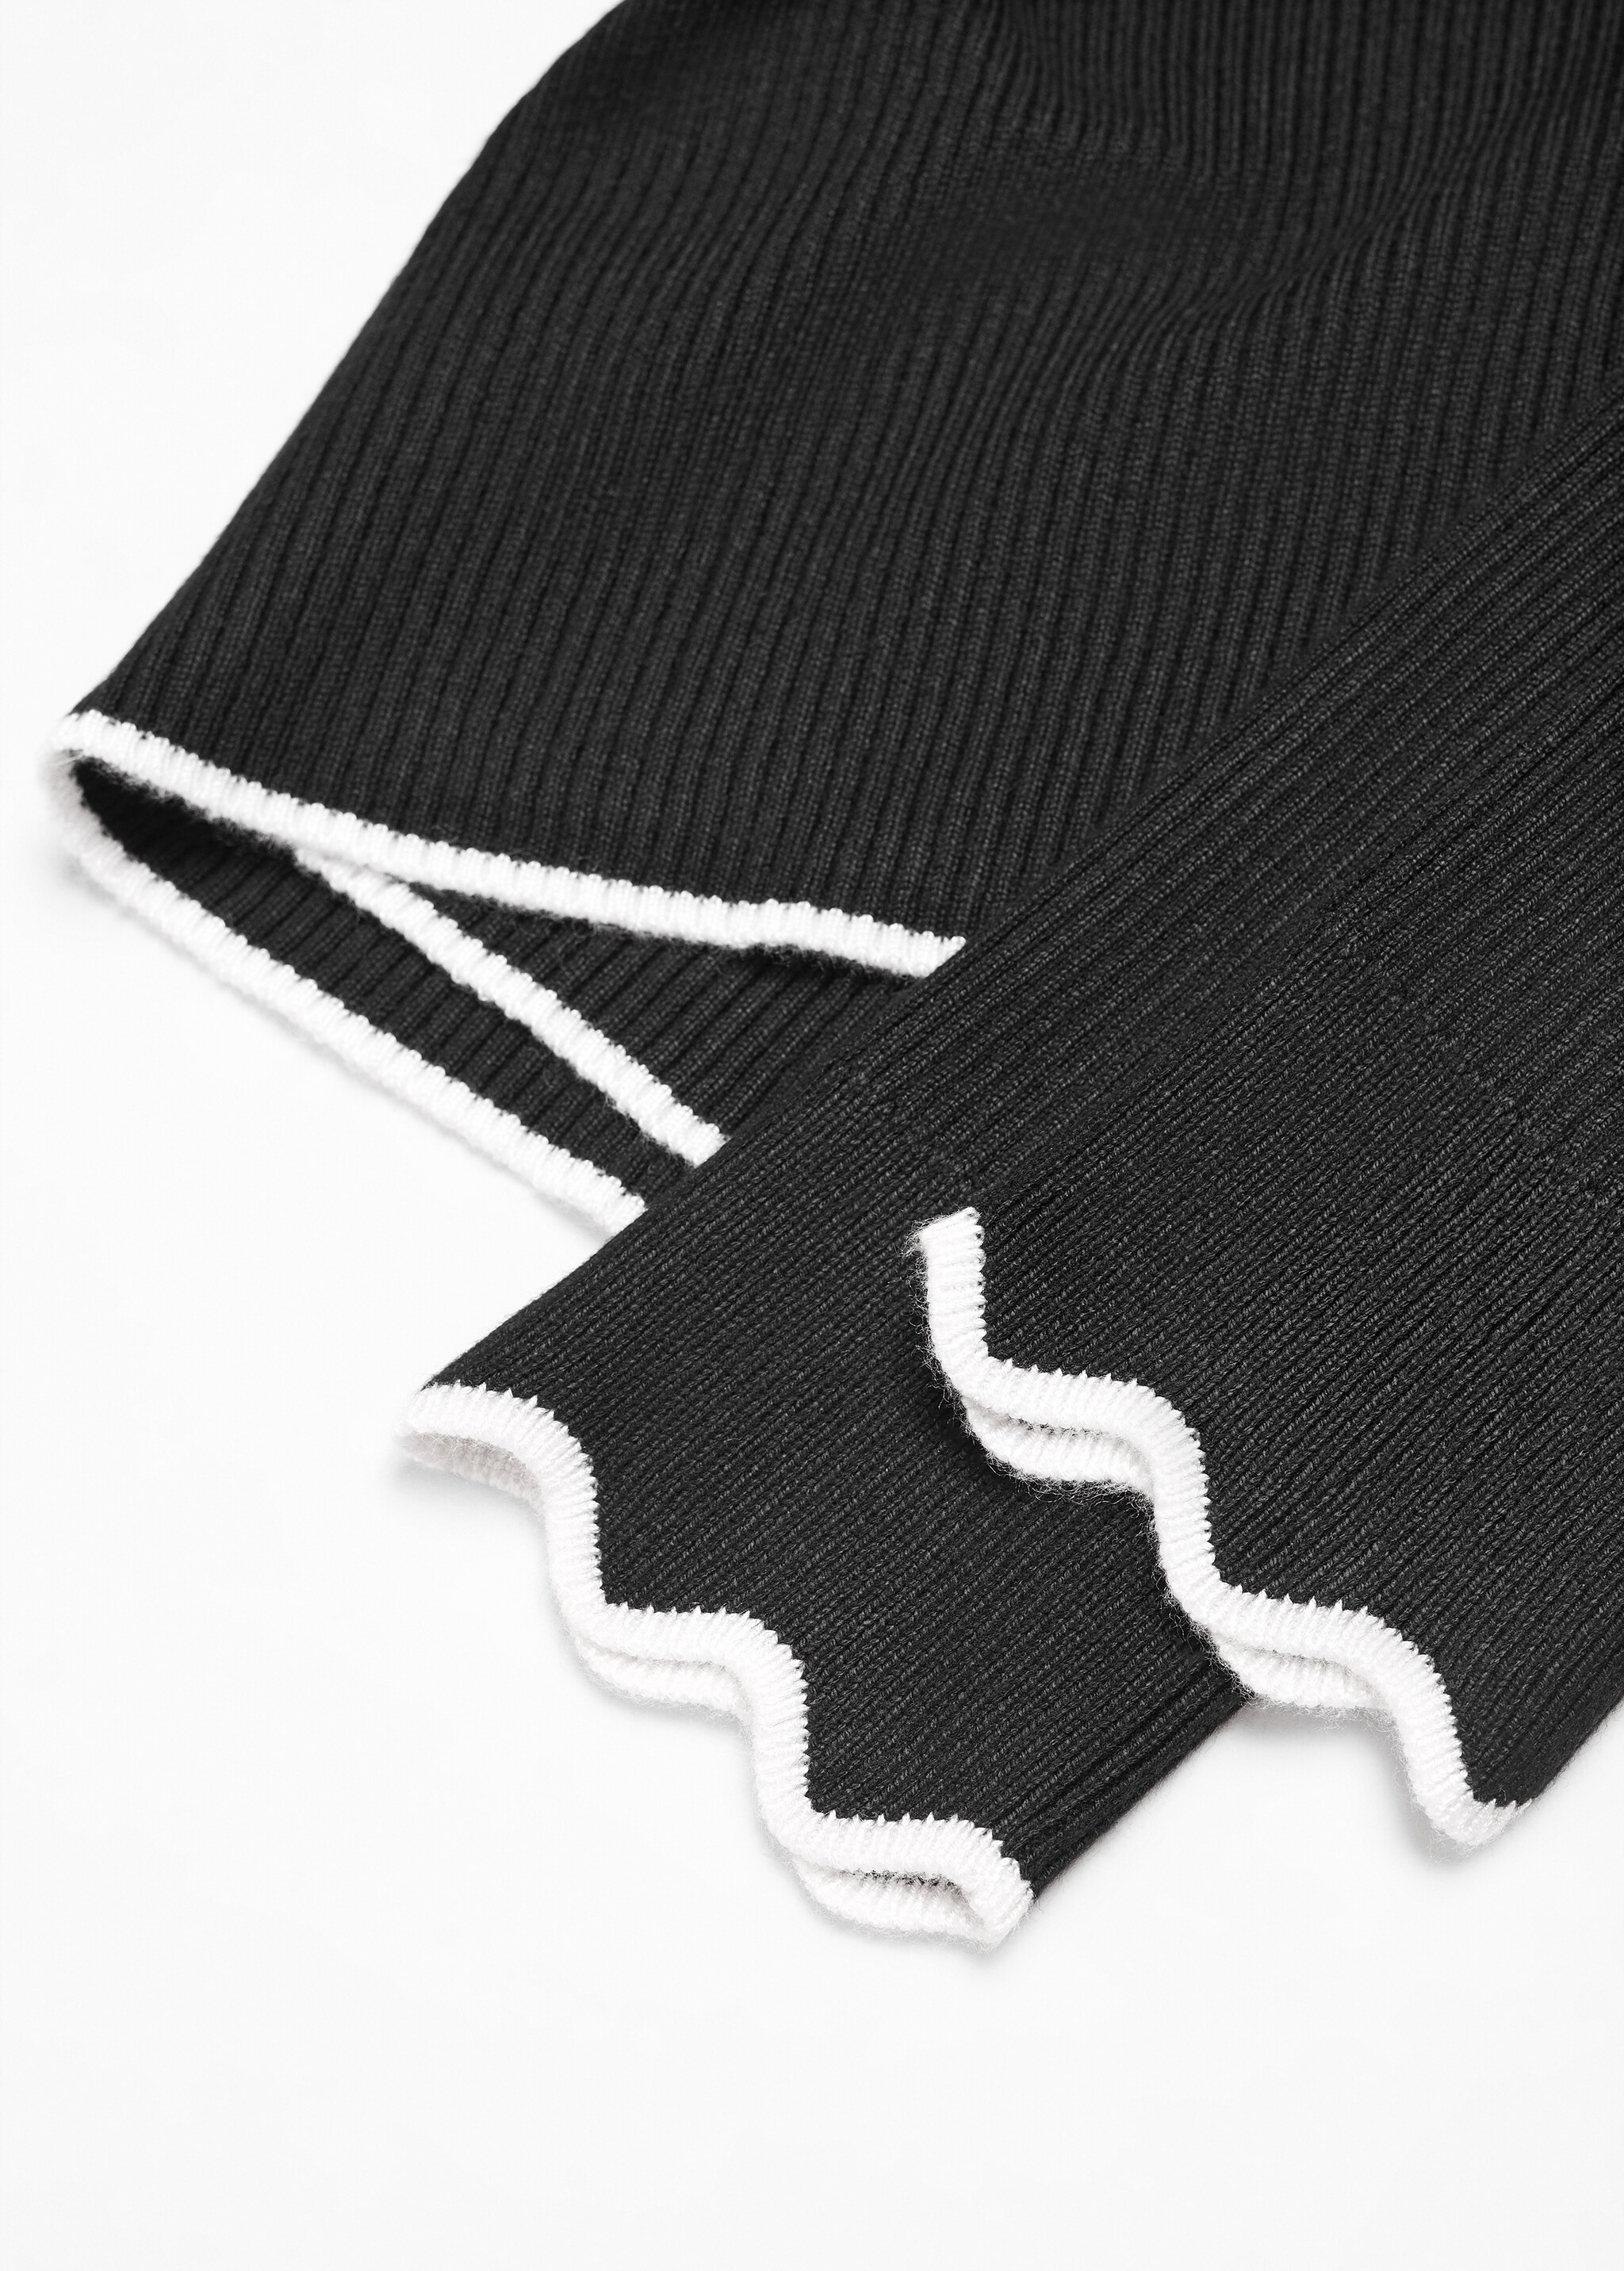 Contrast ribbed sweater - Details of the article 8